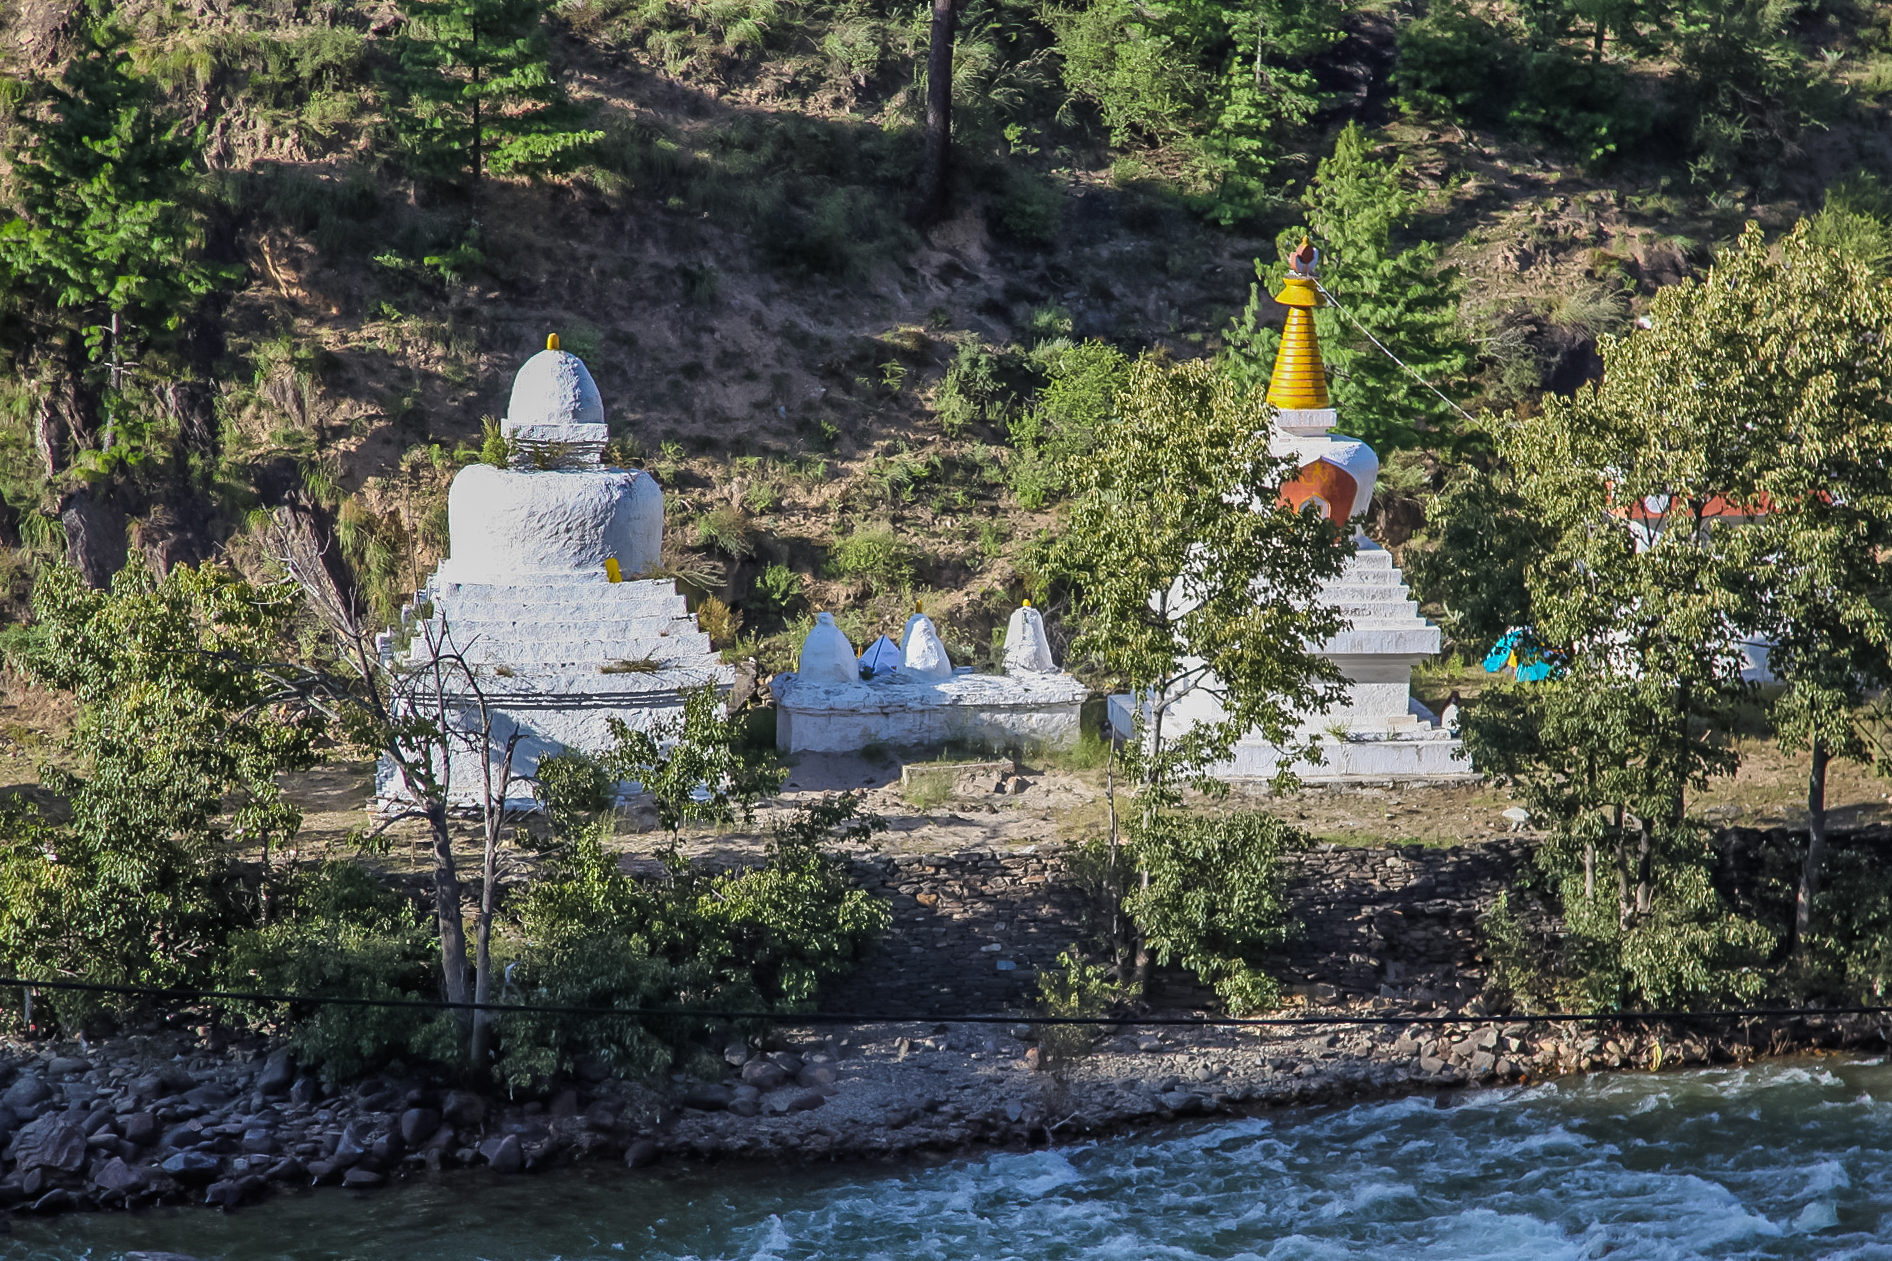  The meeting of two rivers, with stupas representing Hinduism, Thai Buddhism, Nepalese Buddhism and Bhutan Bhuddism. (Did I get that right, Chencho?)&nbsp; 